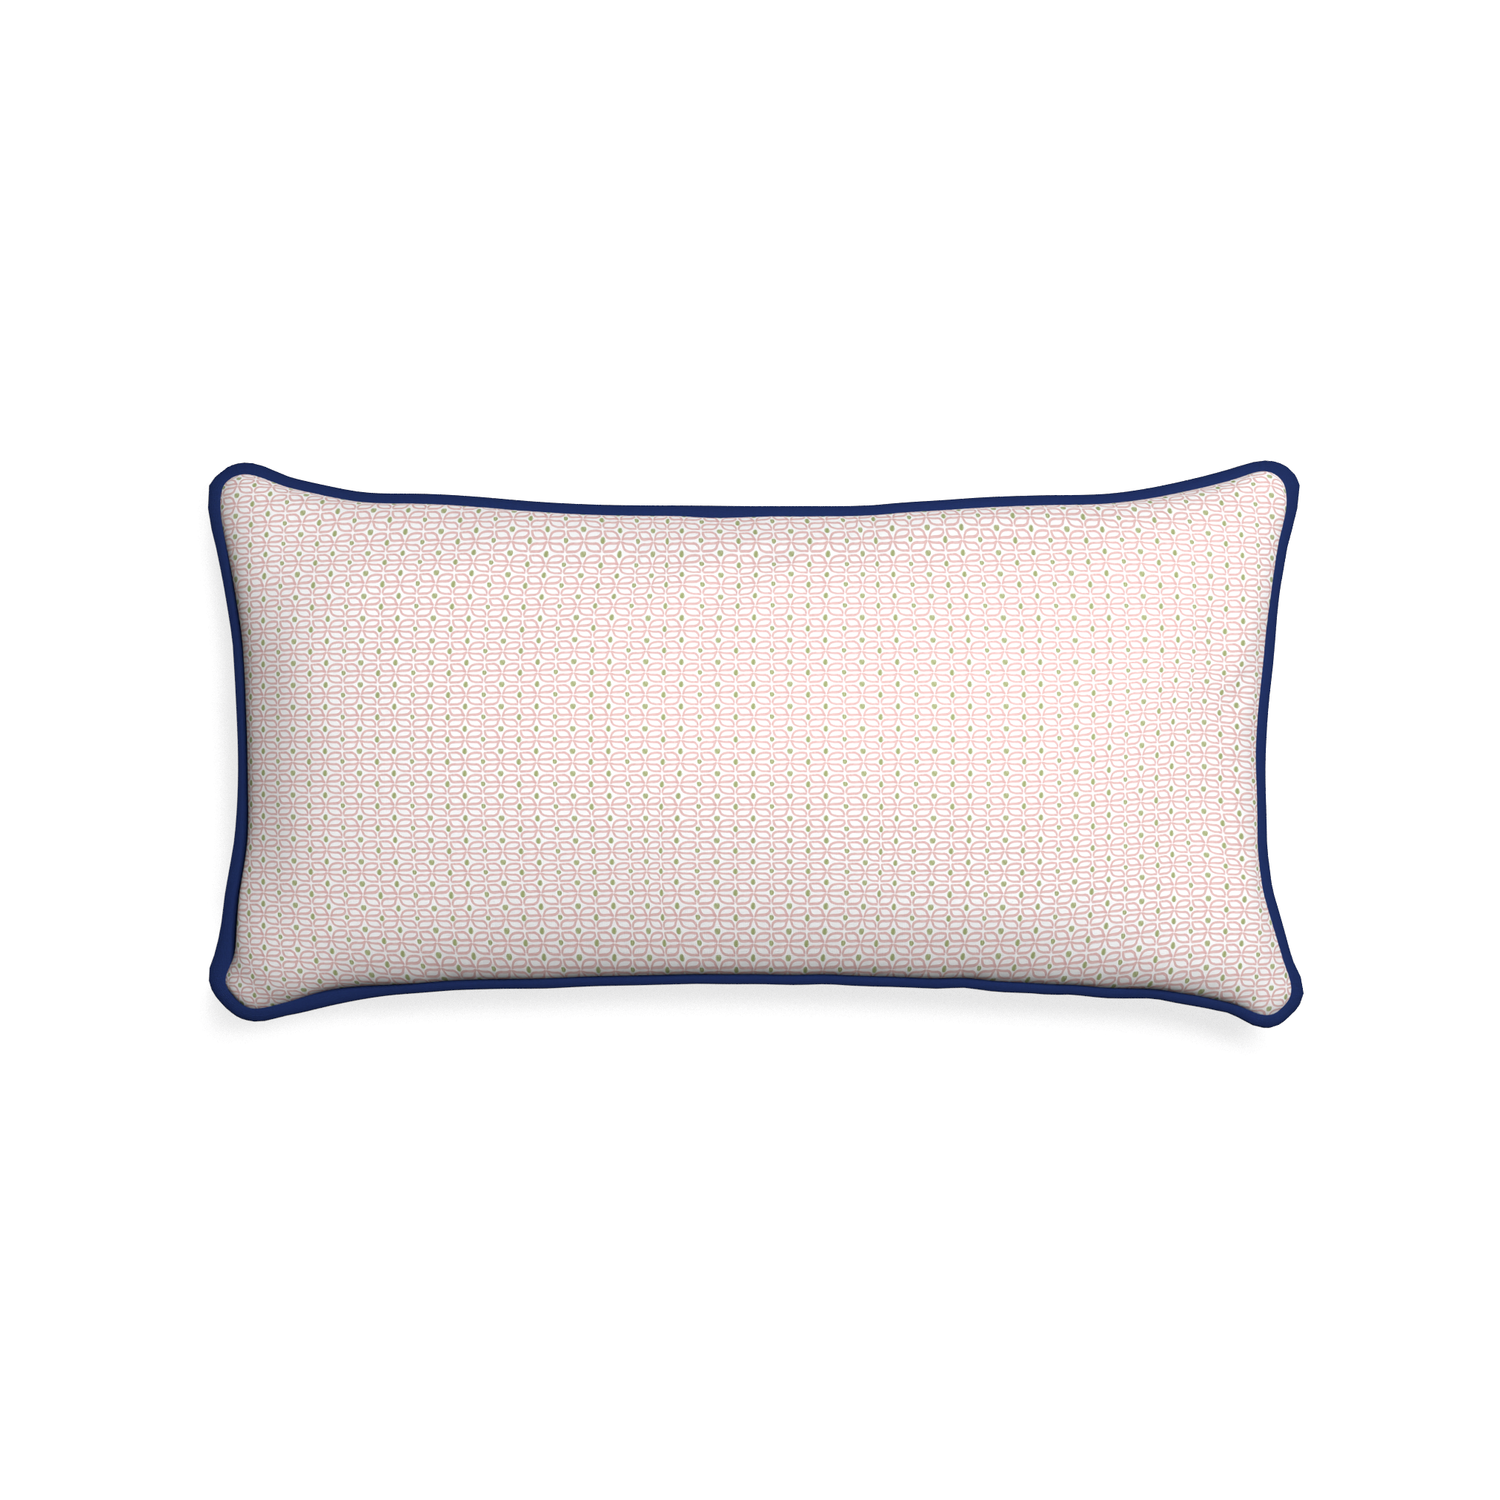 Midi-lumbar loomi pink custom pink geometricpillow with midnight piping on white background